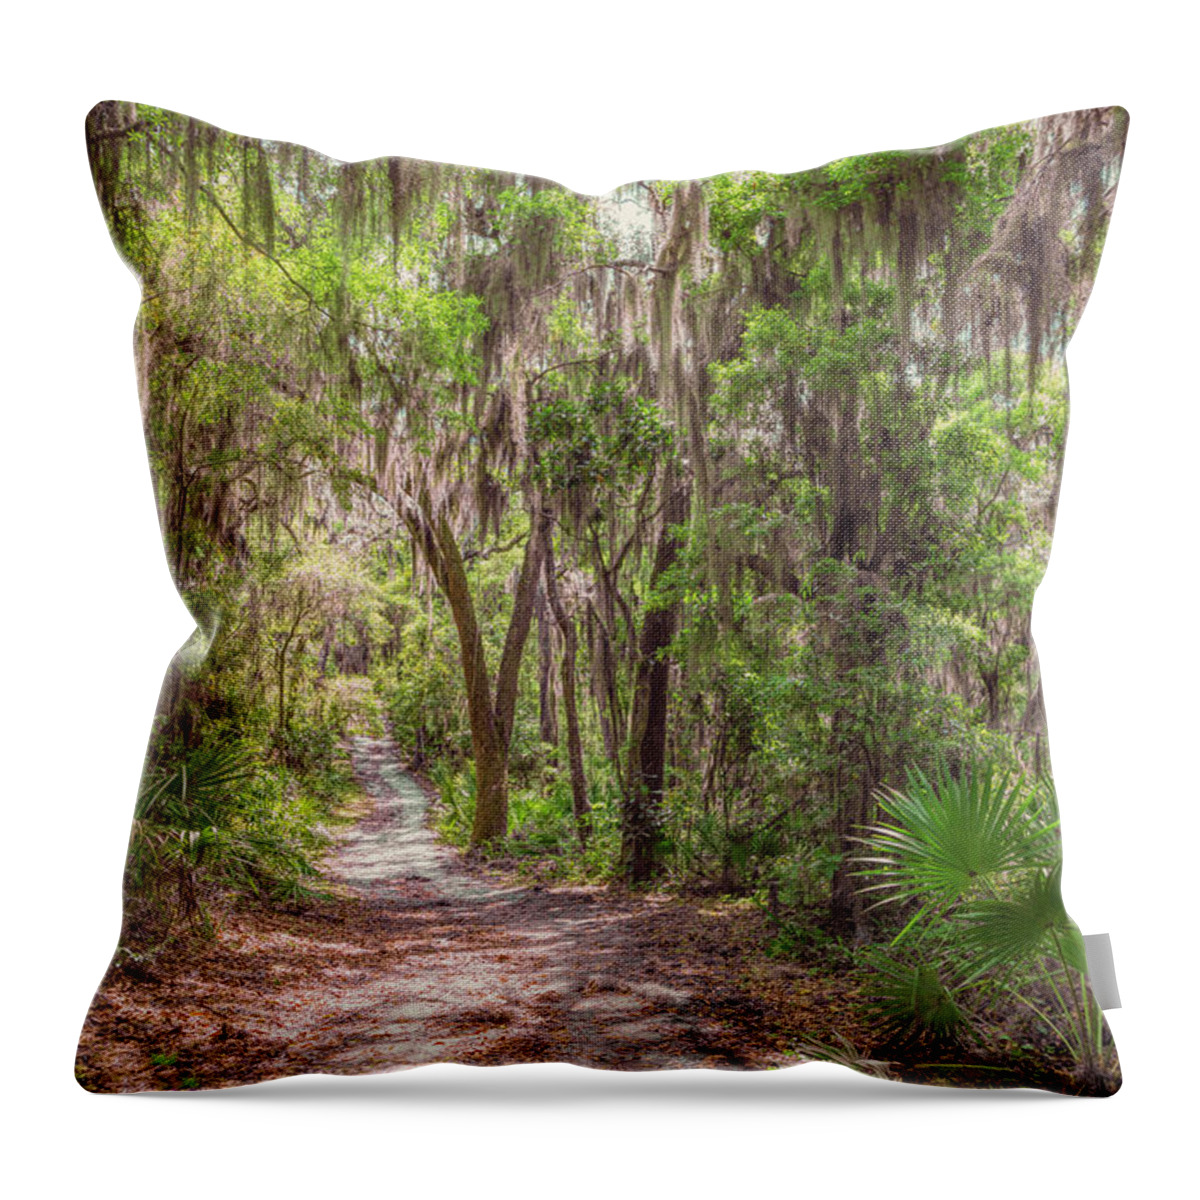 Artforsale Throw Pillow featuring the photograph A Forest Trail by John M Bailey